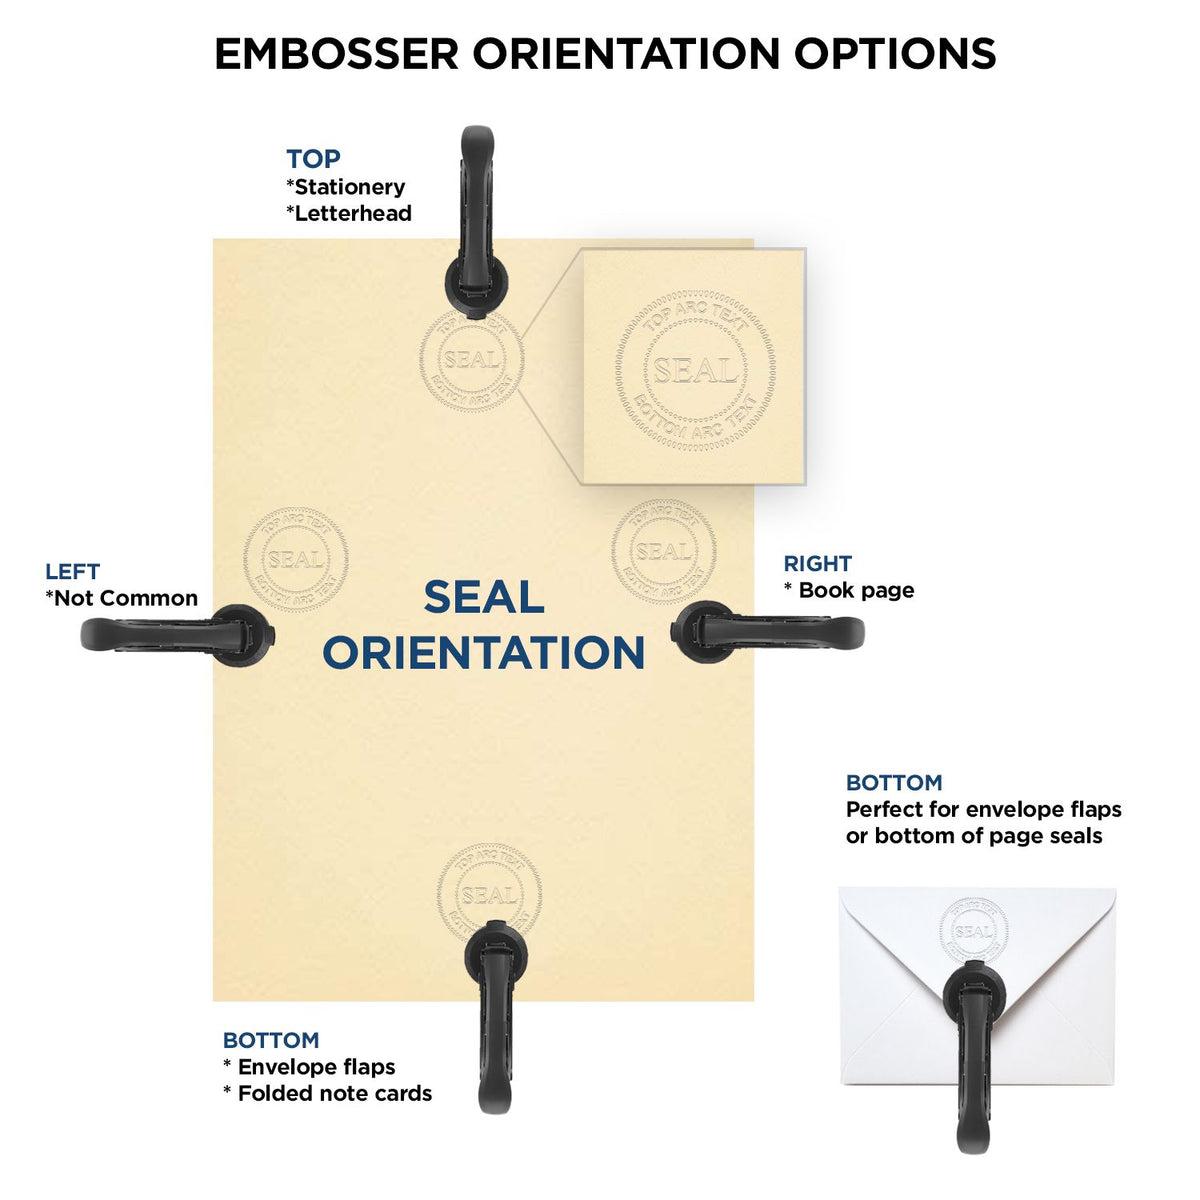 An infographic for the Gift Oklahoma Land Surveyor Seal showing embosser orientation, this is showing examples of a top, bottom, right and left insert.